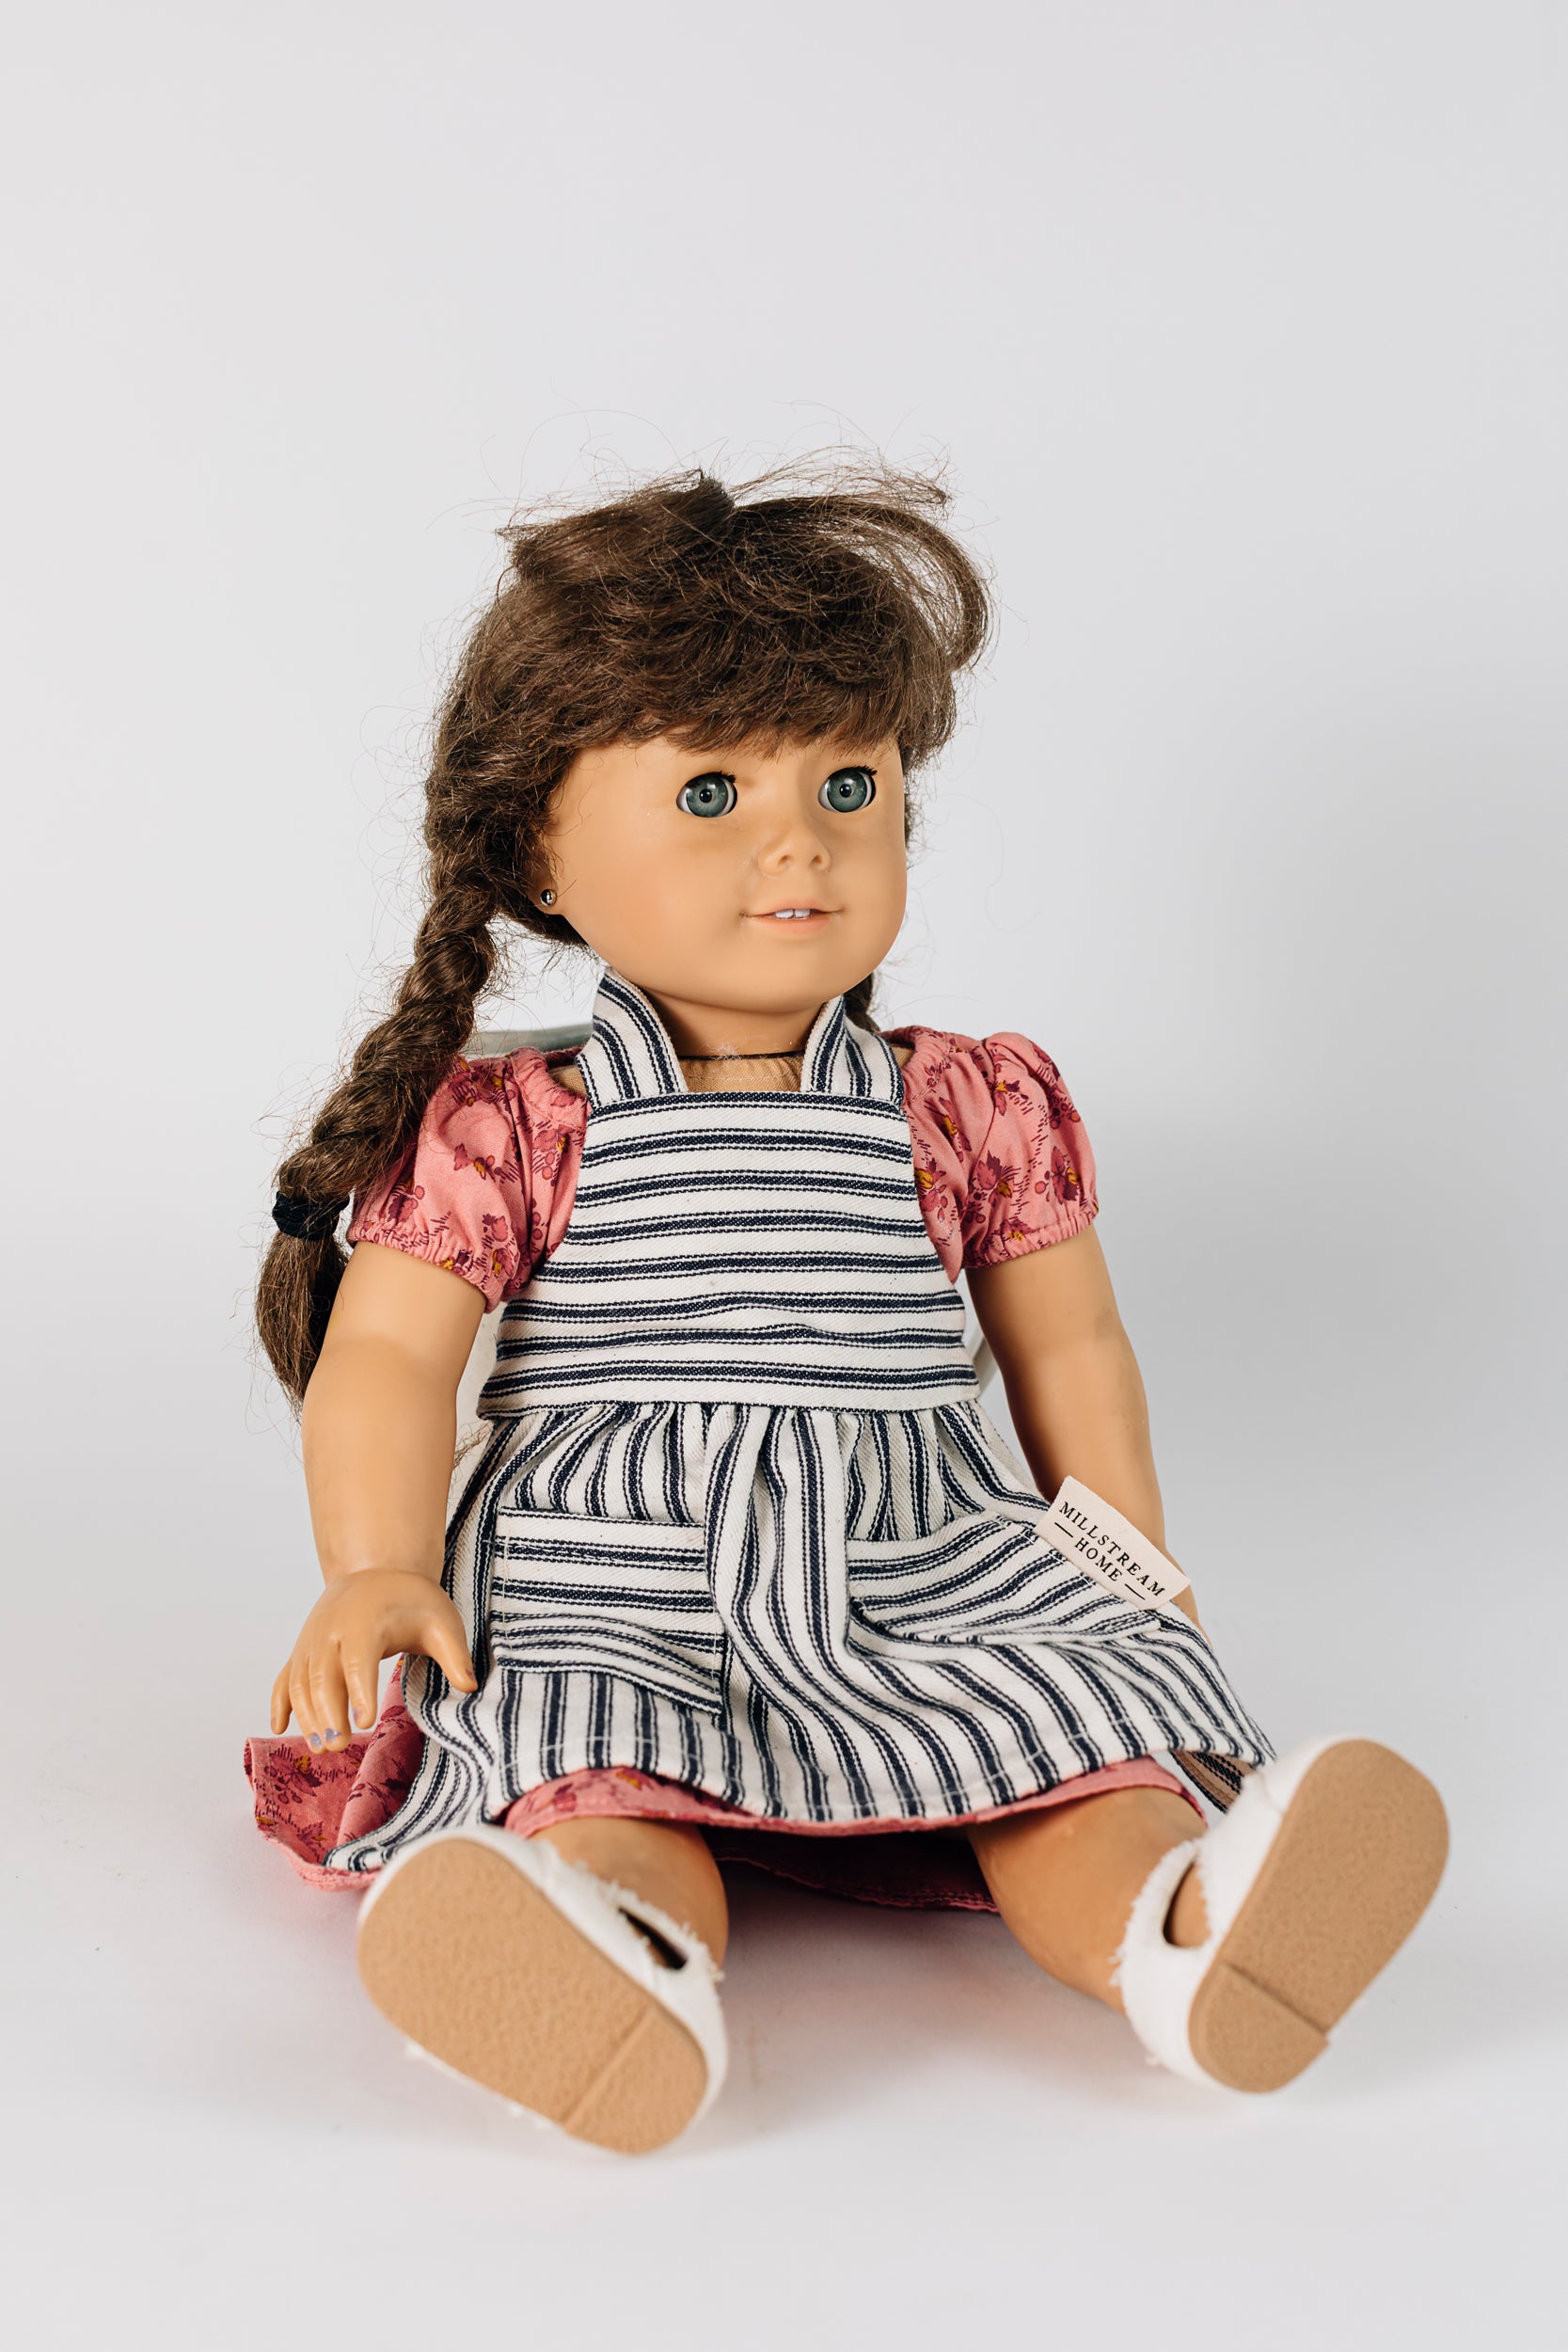 Doll Wearing a Doll Apron